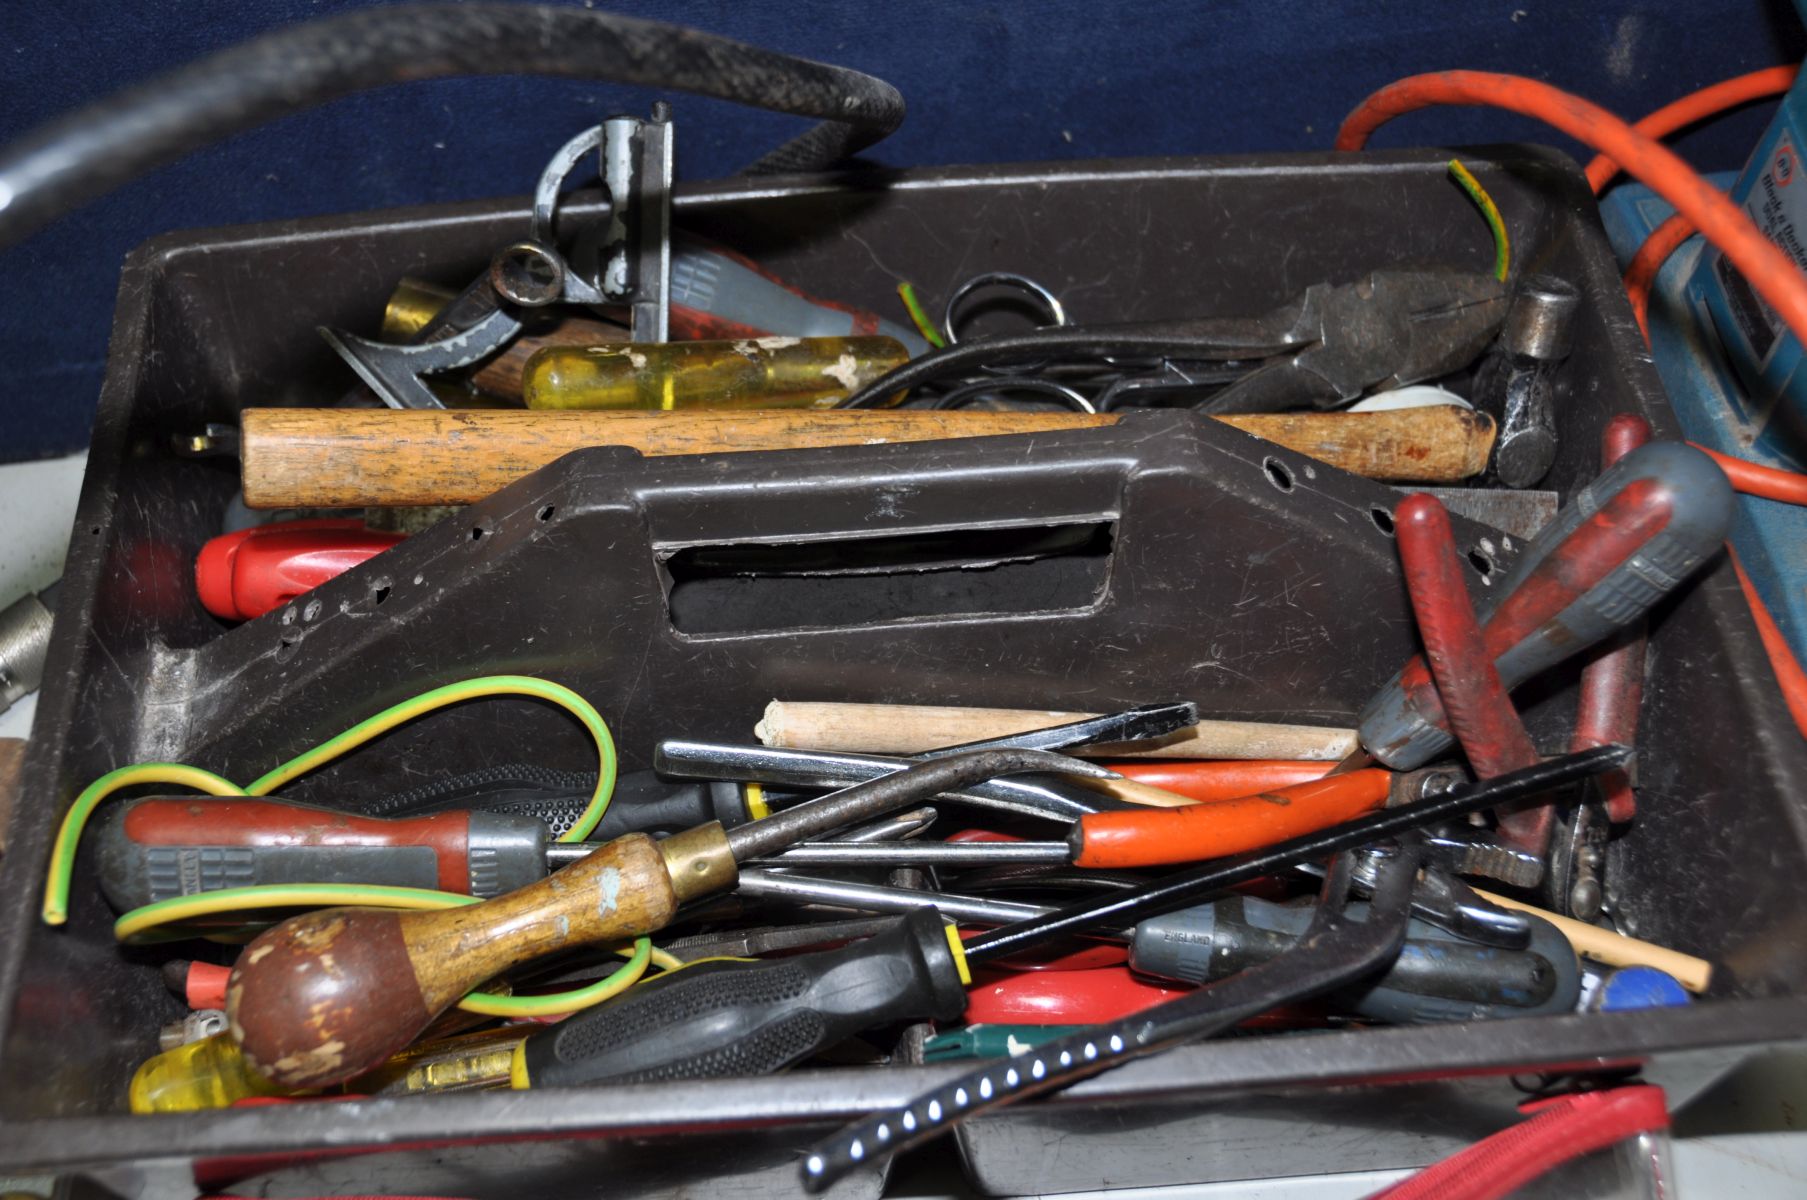 A TRAY CONTAINING HANDTOOLS AND A MINI COMPRESSOR (untested) including a multimeter, screwdrivers, - Image 5 of 6